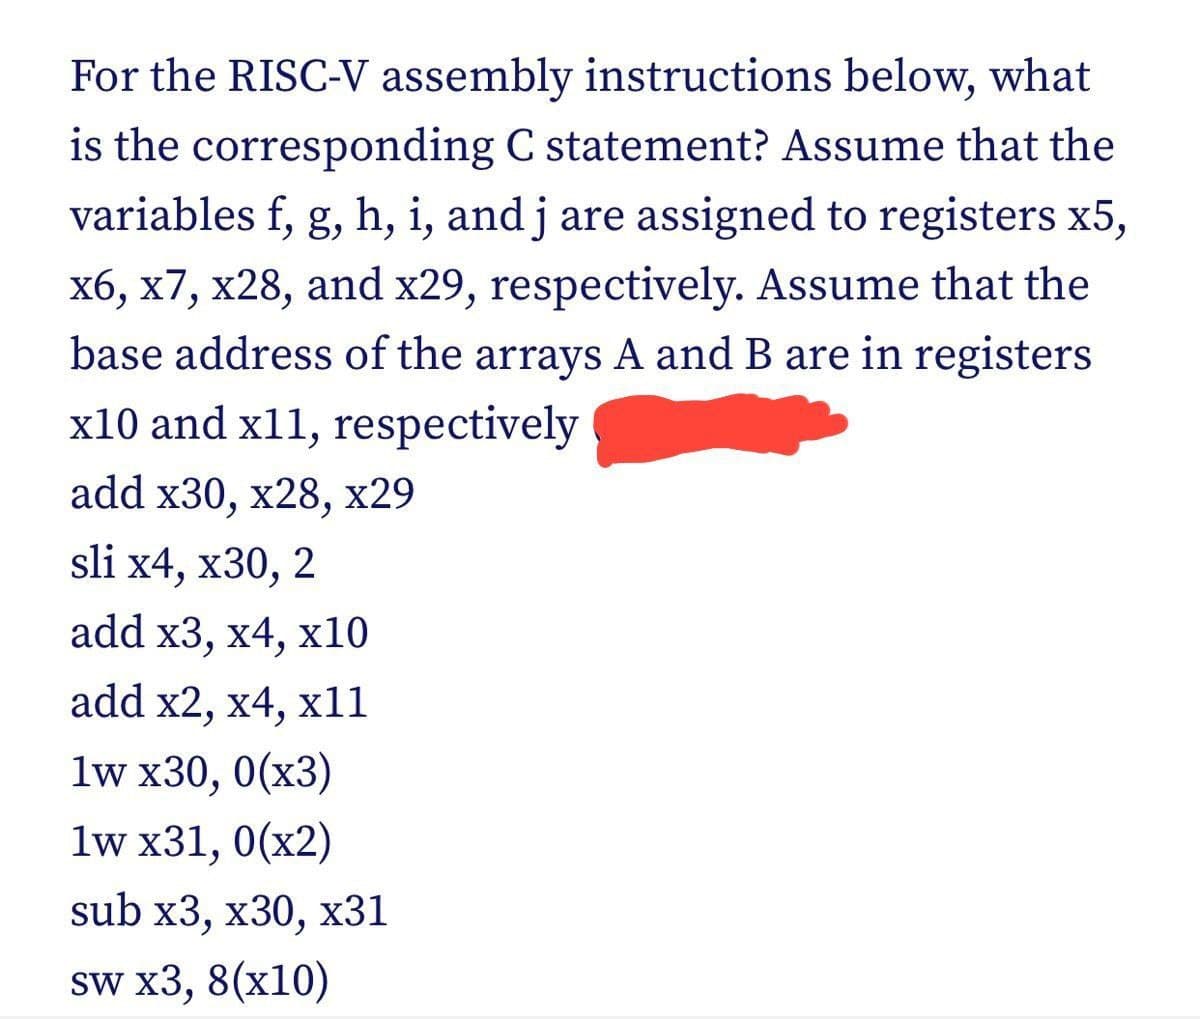 For the RISC-V assembly instructions below, what
is the corresponding C statement? Assume that the
variables f, g, h, i, and j are assigned to registers x5,
x6, x7, x28, and x29, respectively. Assume that the
base address of the arrays A and B are in registers
x10 and x11, respectively
add x30, x28, x29
sli x4, x30, 2
add x3, x4, x10
add x2, x4, x11
1w x30, 0(x3)
1w x31, 0(x2)
sub x3, x30, x31
sw x3, 8(x10)